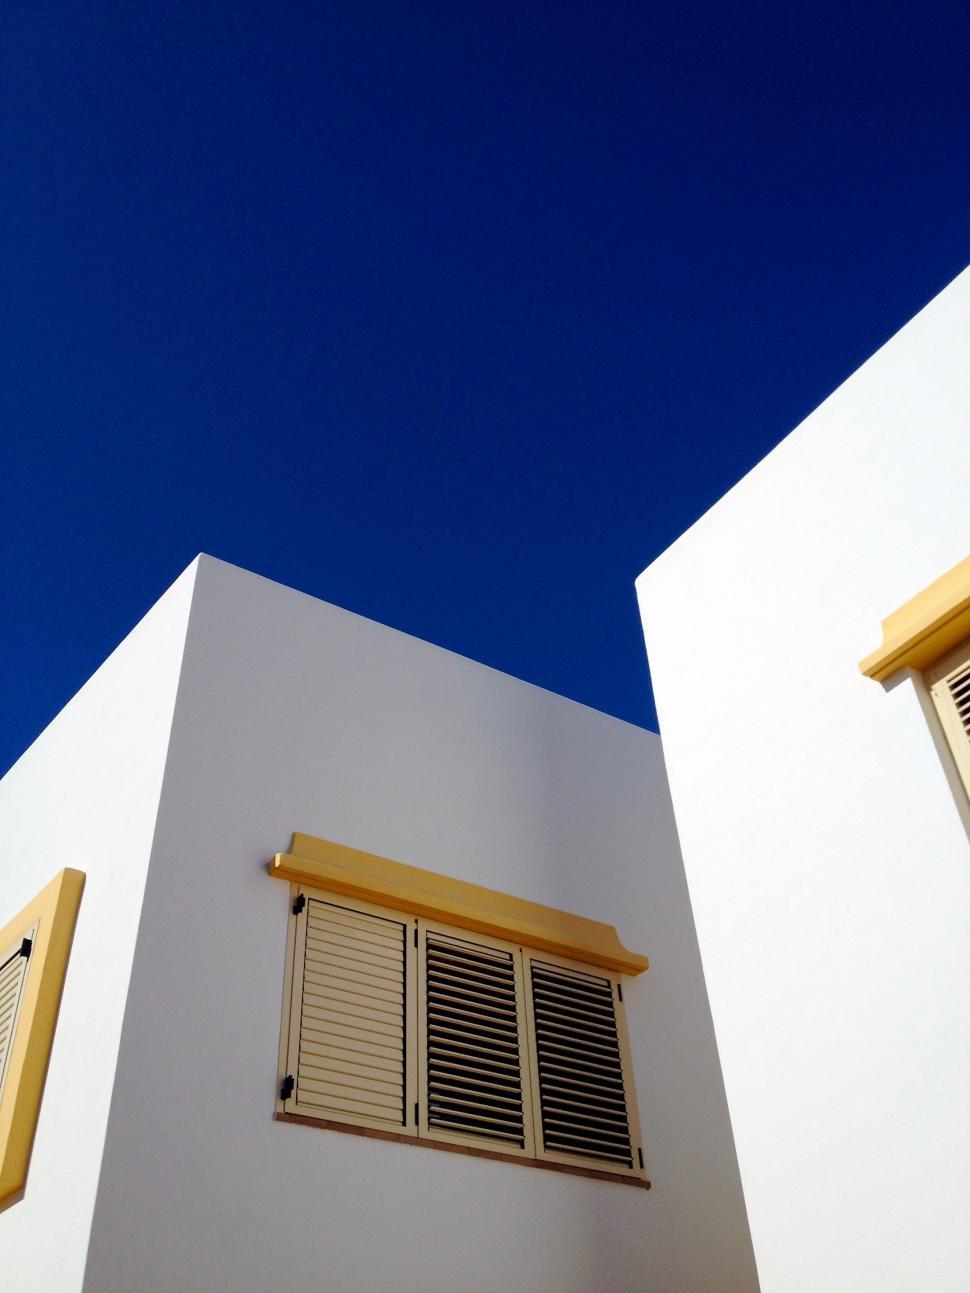 Free Image of White Building With Shutters and Window 